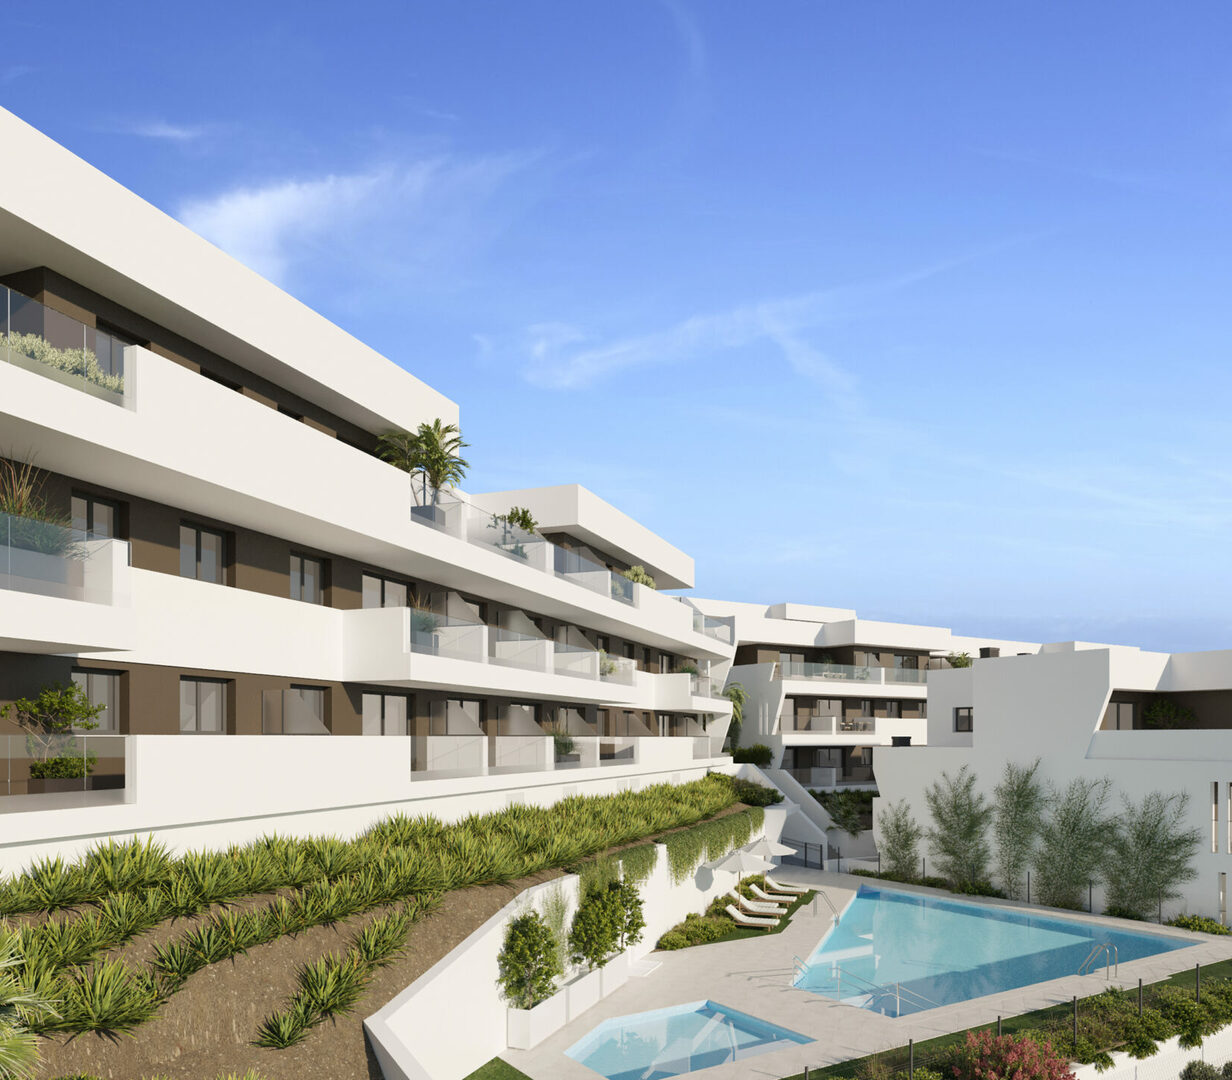 Modern living in the heart of the Costa del Sol